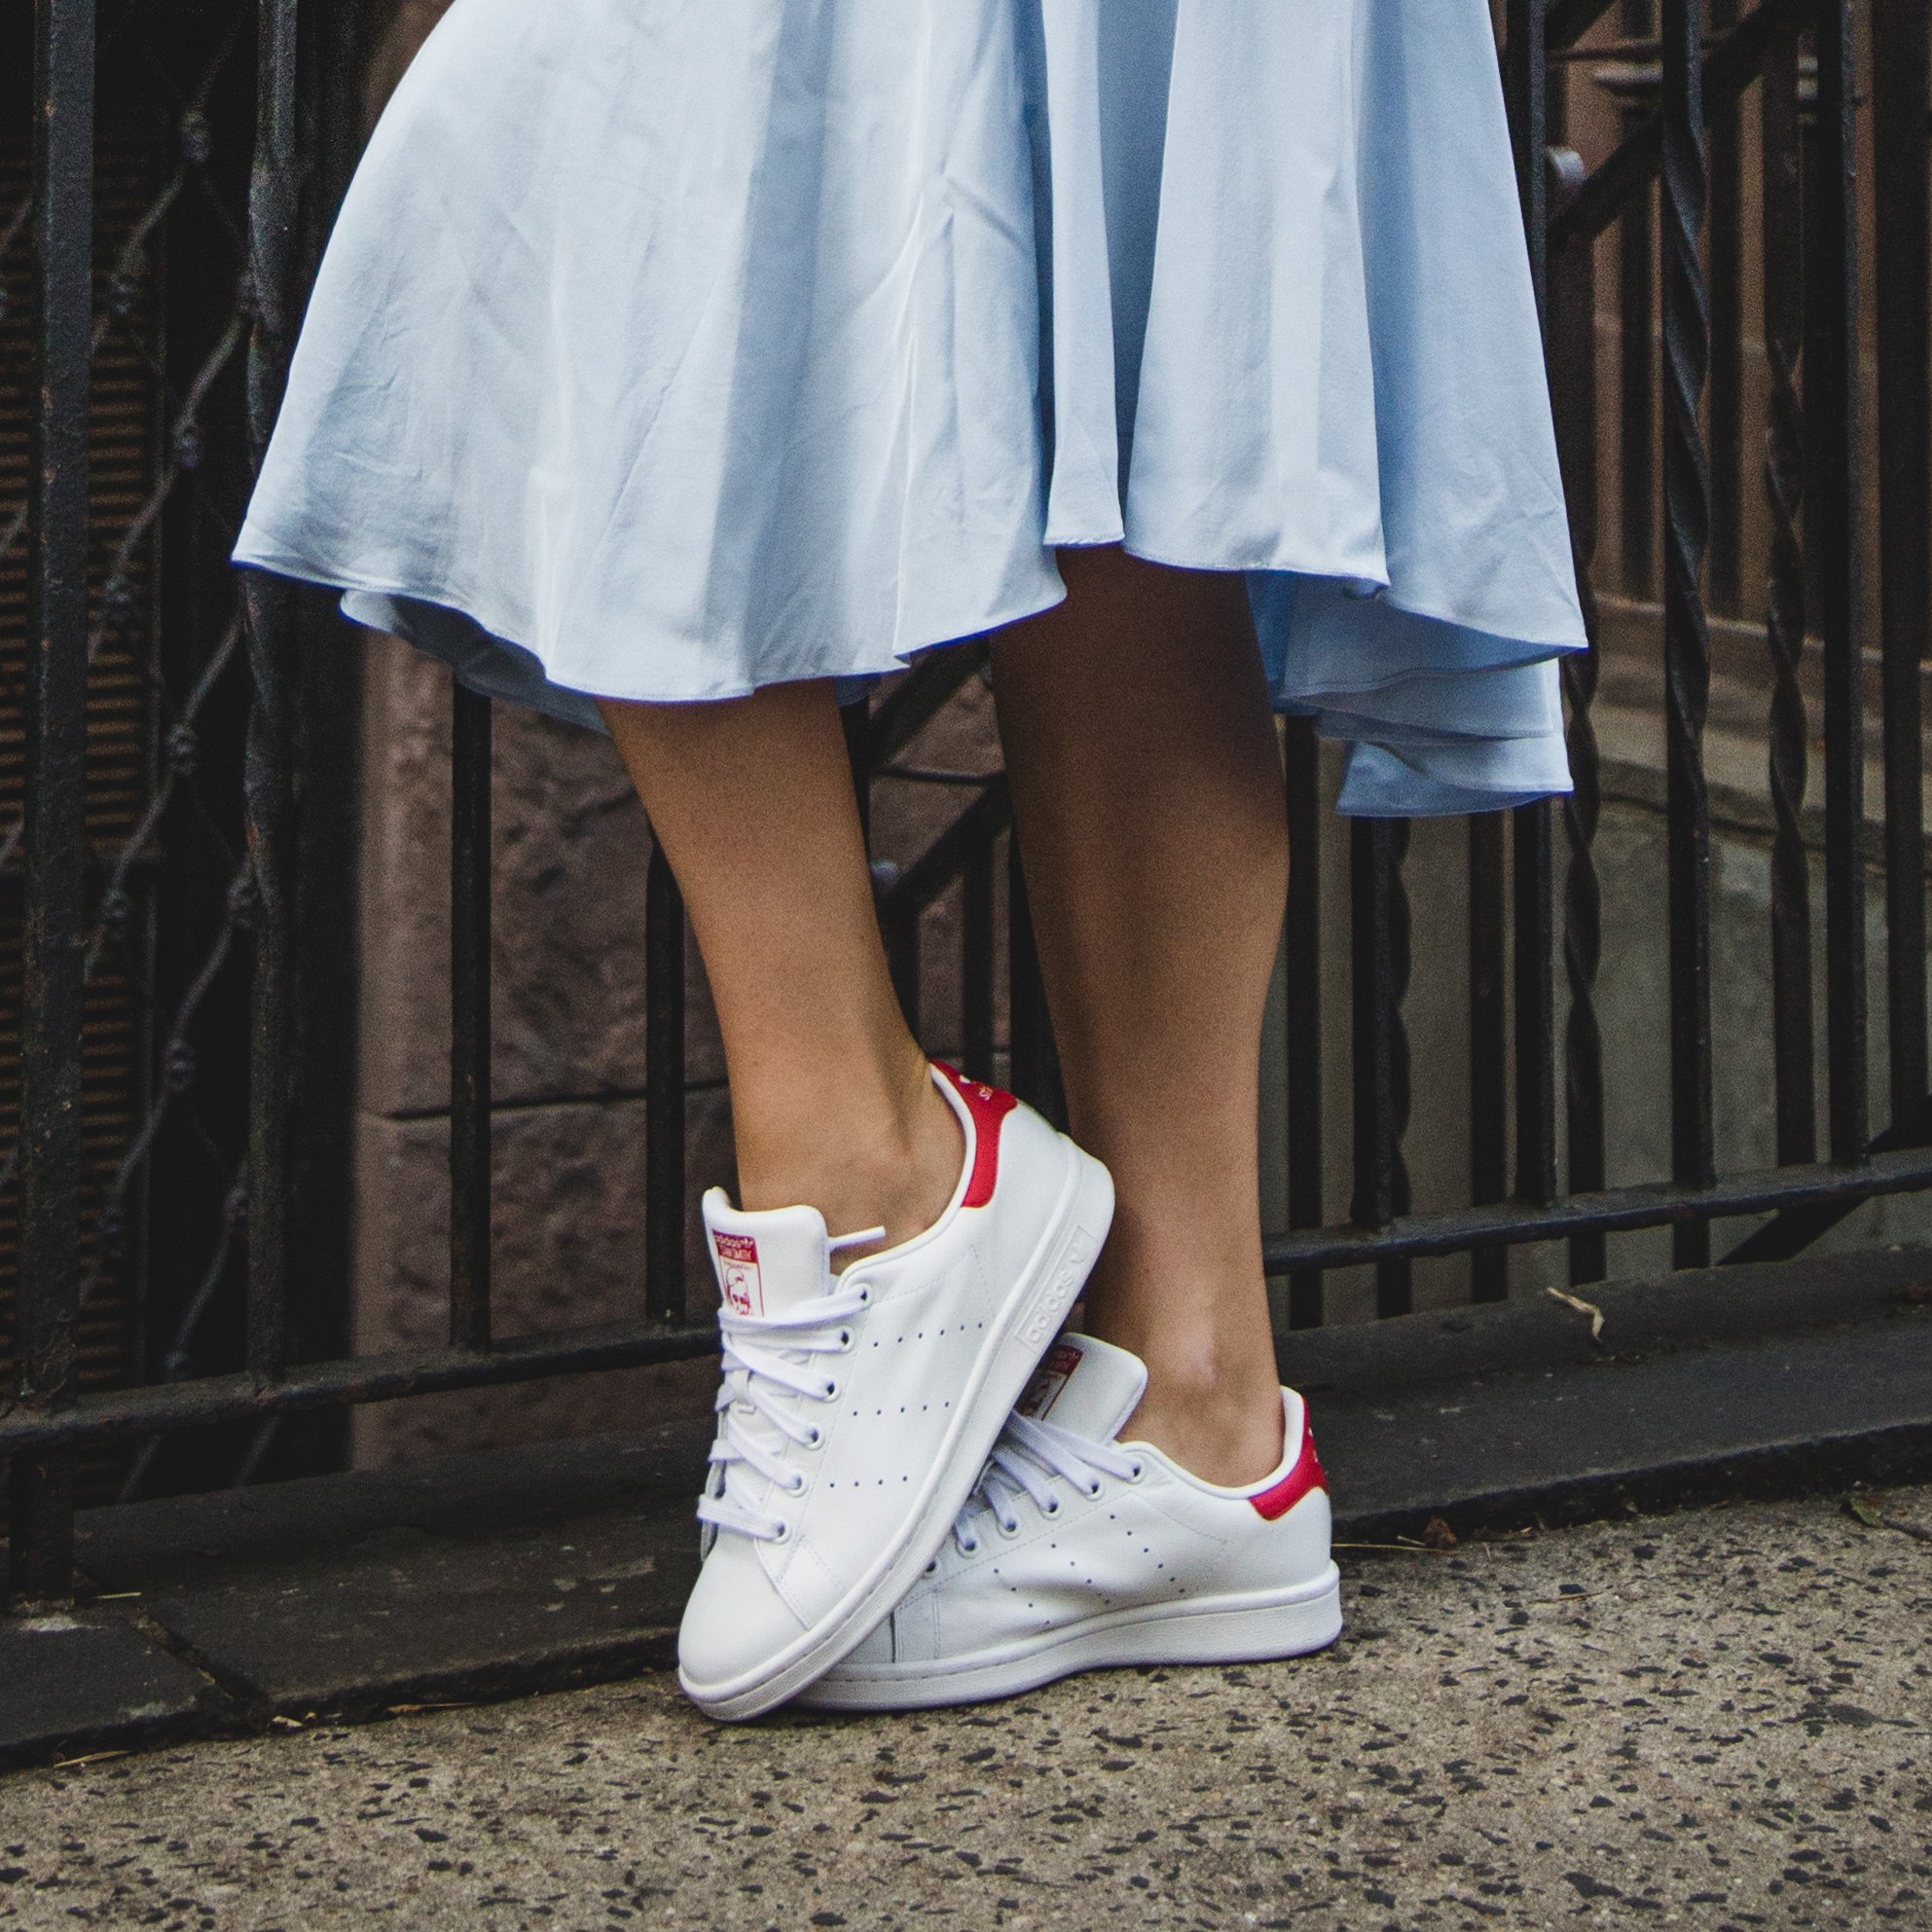 Comfortable, Fashionable Shoes and Sneakers | POPSUGAR Fashion